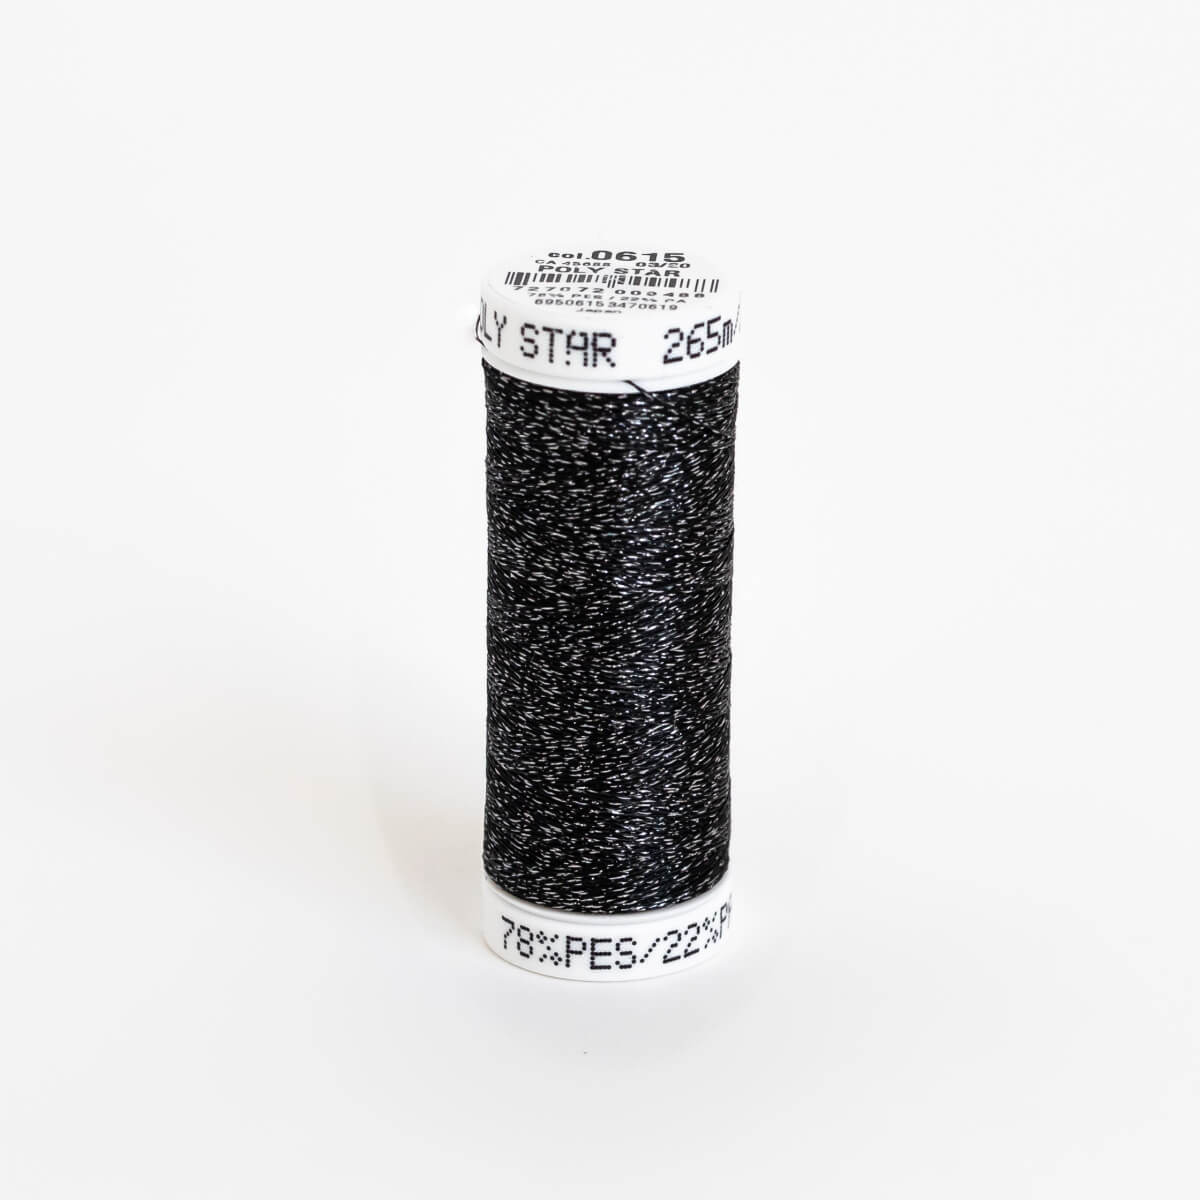 SULKY POLY SPARKLE (STAR) 30, 265m/290yds Snap Spools - Colour 0615 Black with Pewter Sparkle